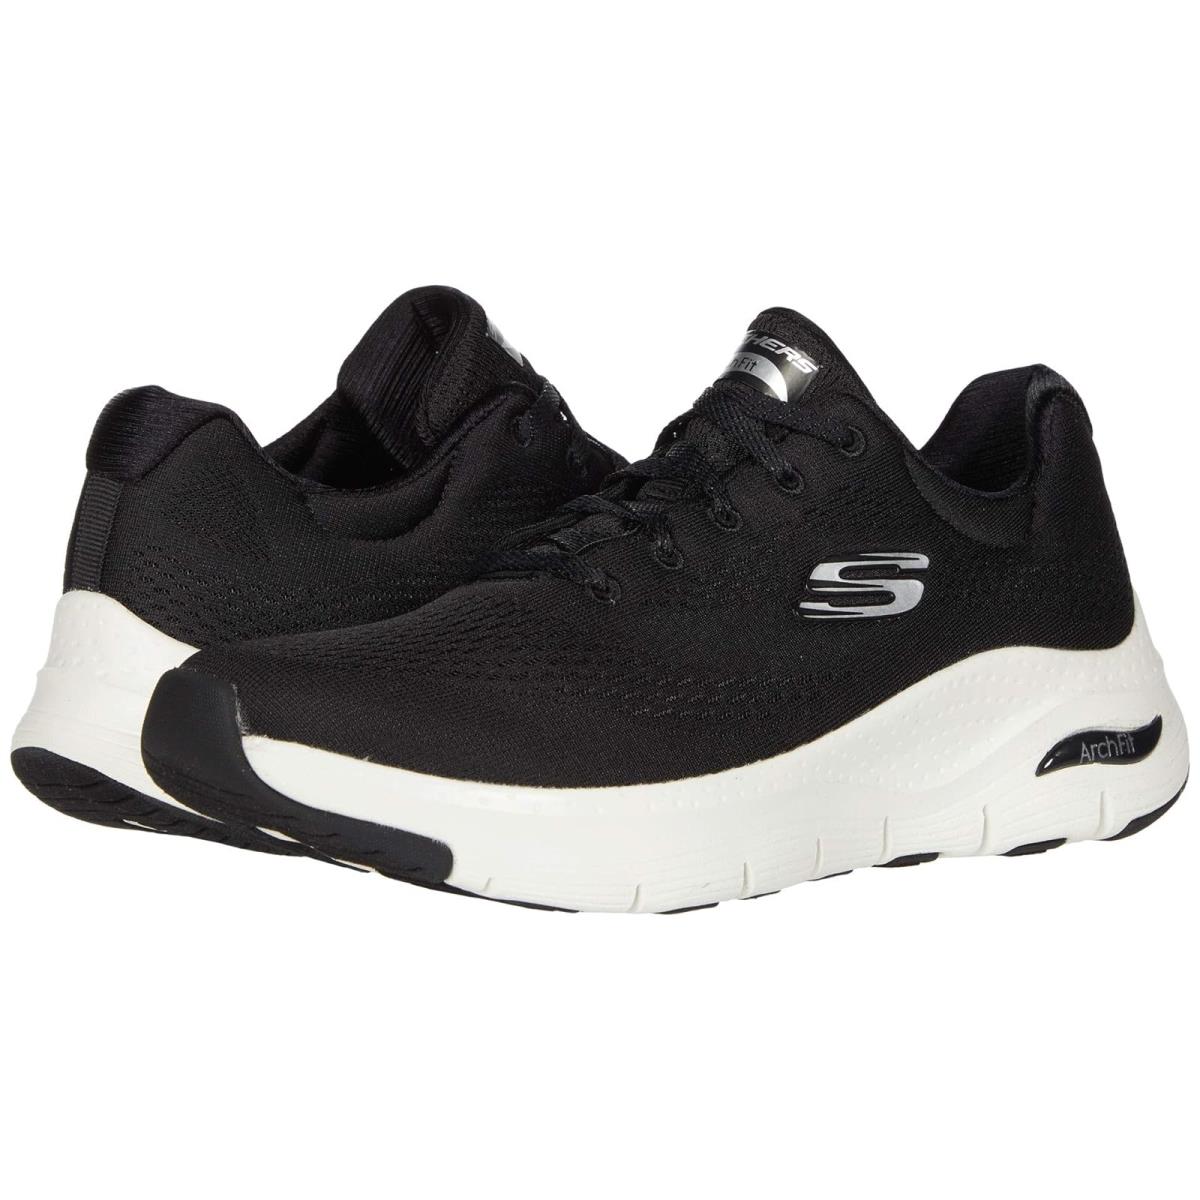 Woman`s Sneakers Athletic Shoes Skechers Arch Fit - Big Appeal Black/White